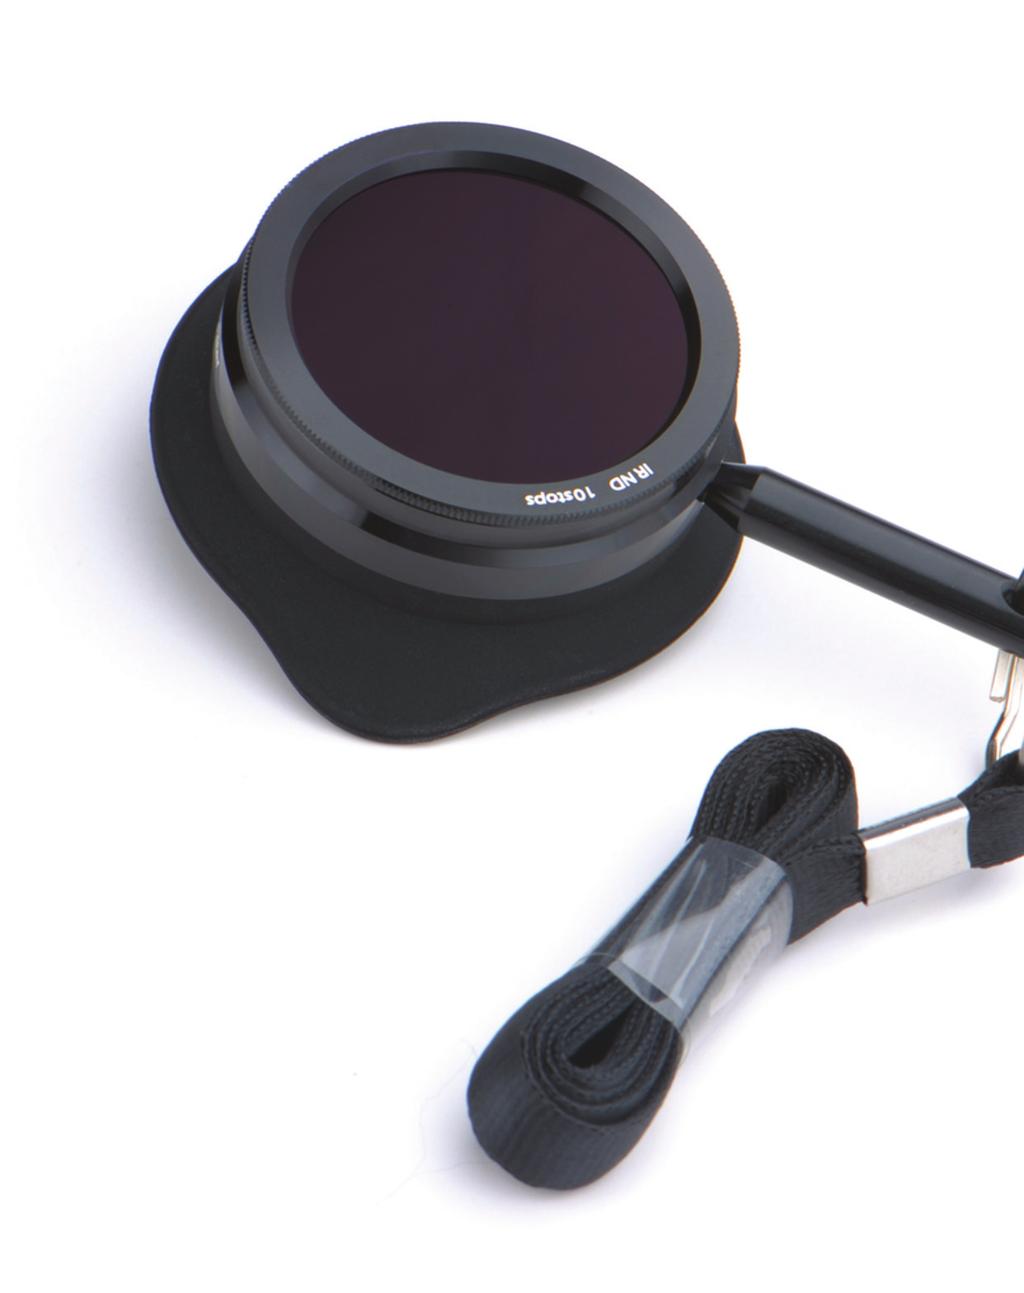 The NiSi Viewing filters are made of aviation grade aluminium, with easy to replace, removable glass. The back has a silicone eyecup to stop light leaks.